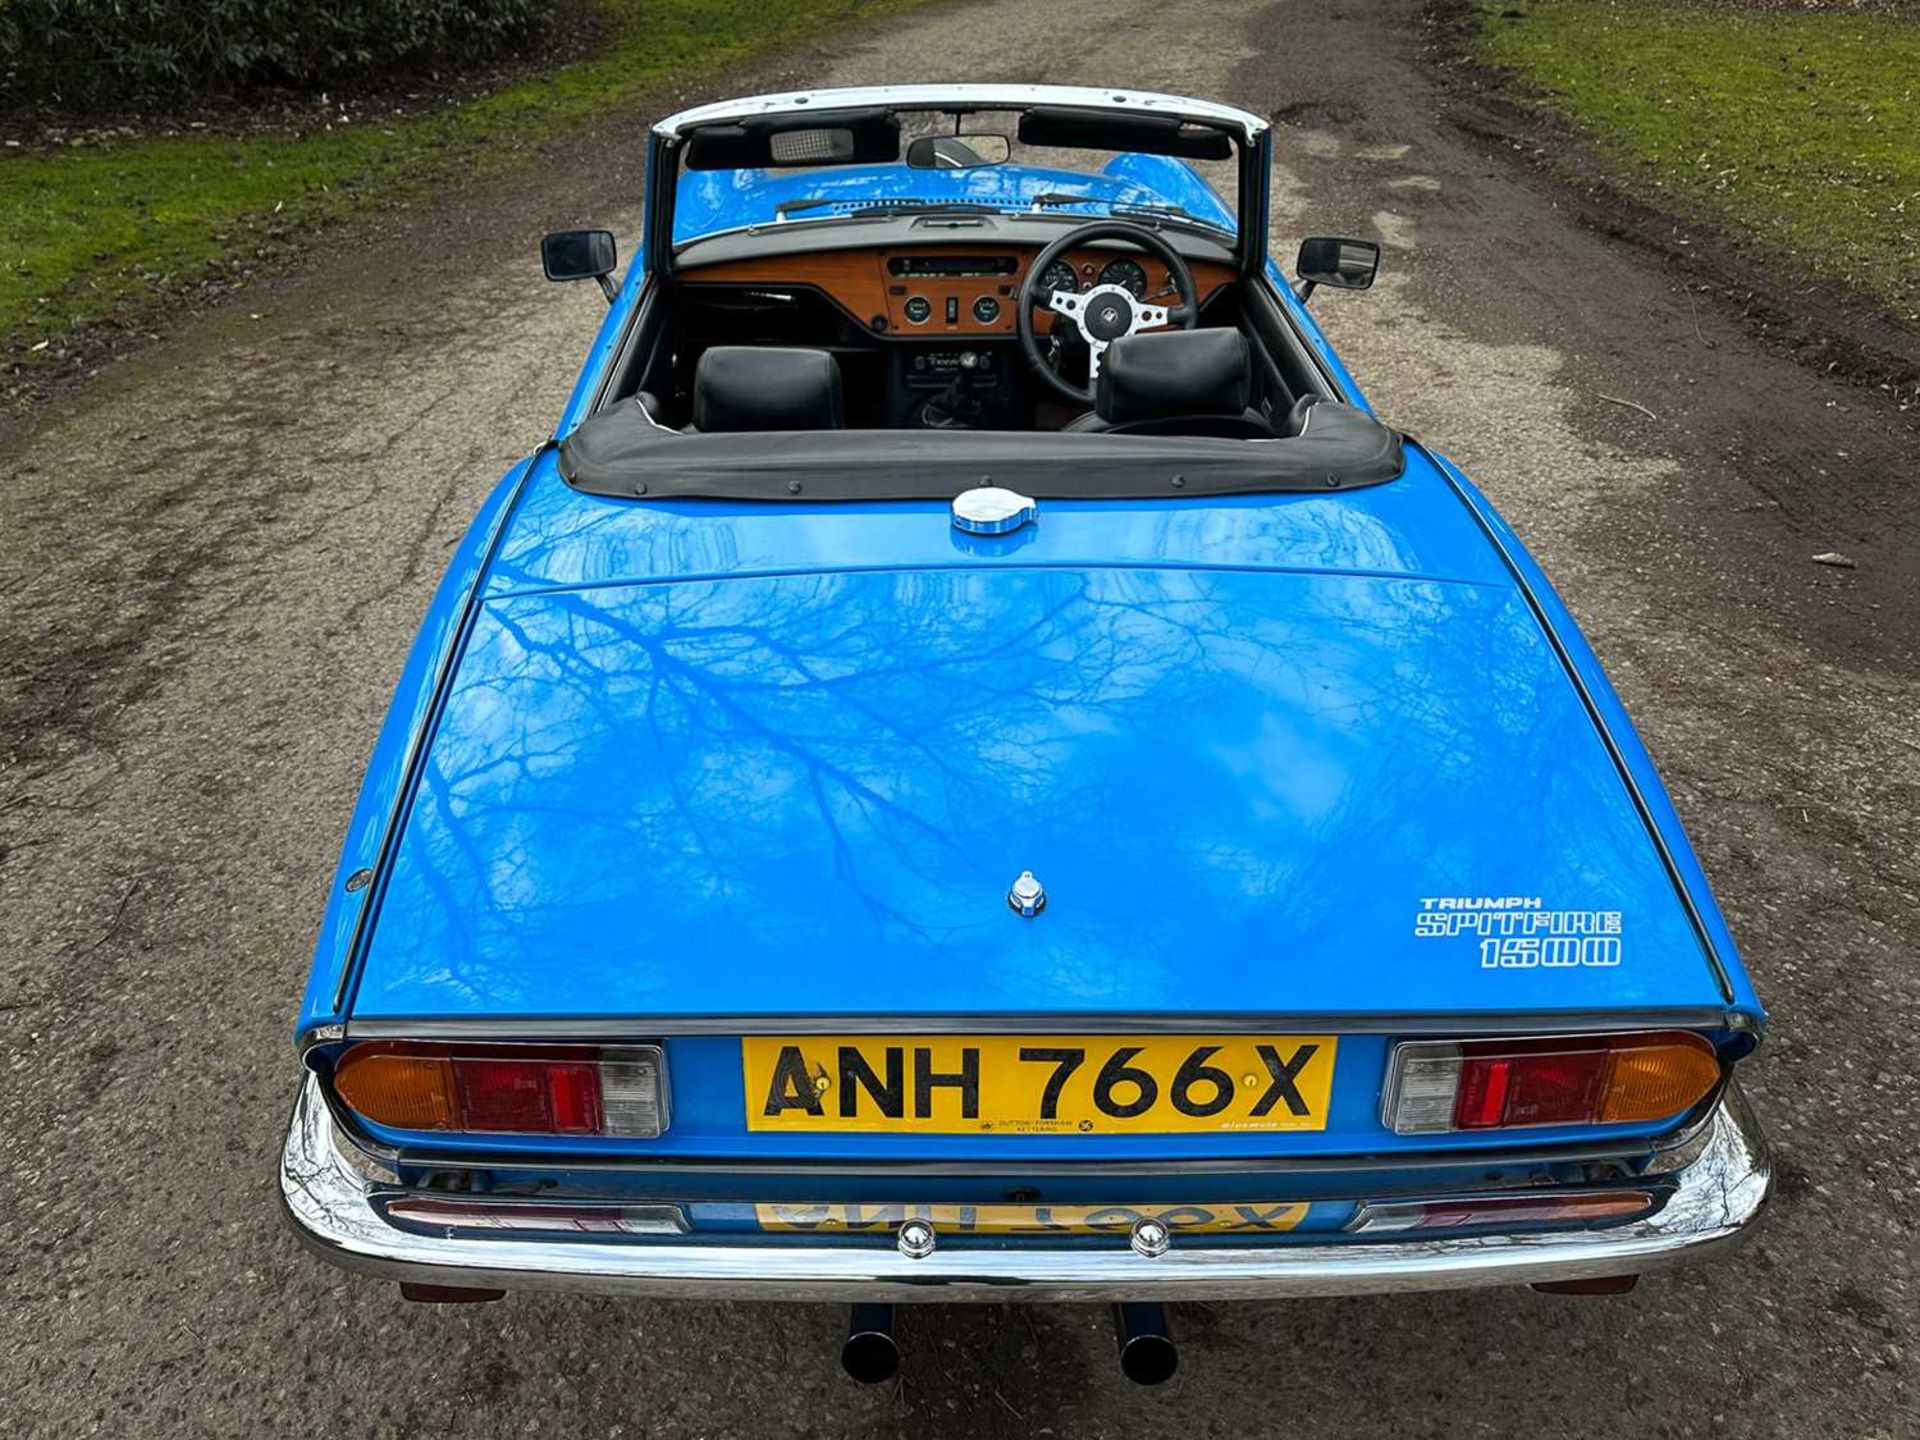 1981 Triumph Spitfire 1500 Comes with original bill of sale - Image 20 of 96